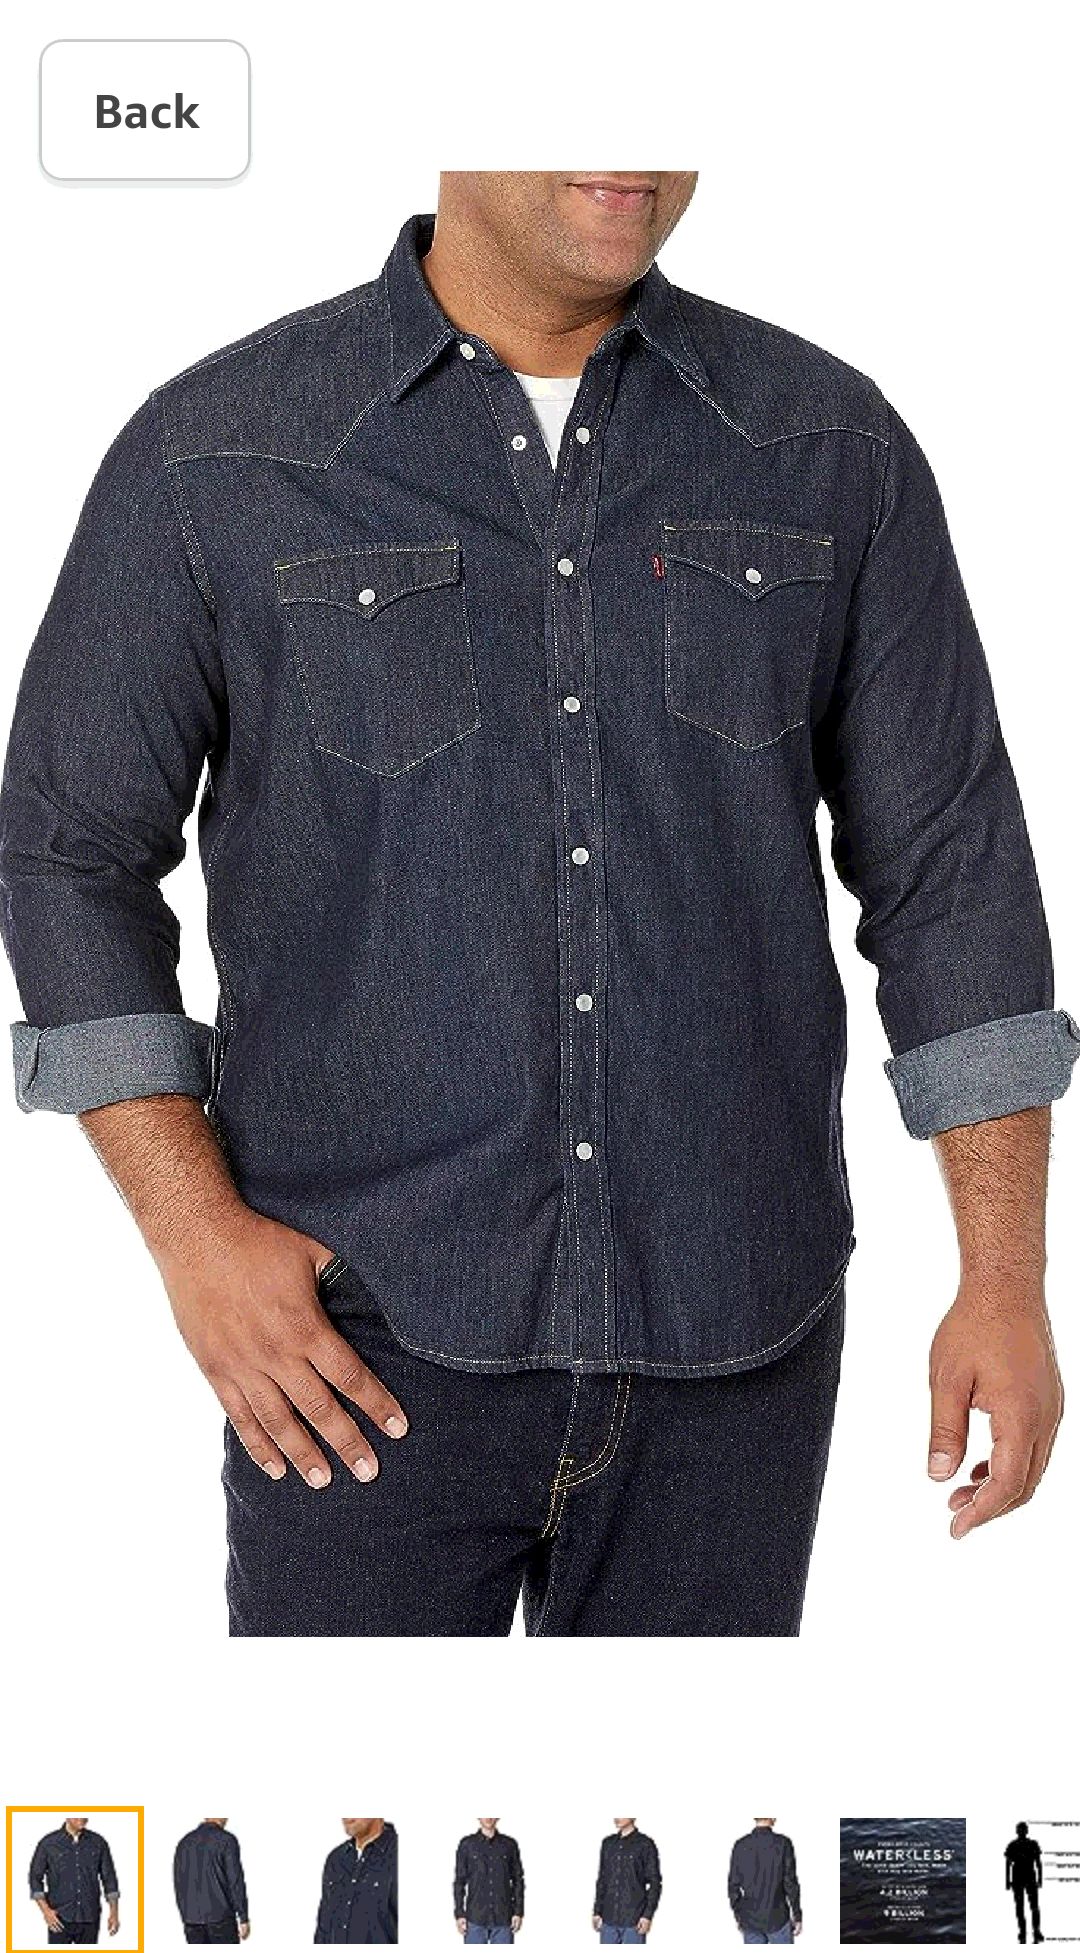 Levi's Men's Classic Western Shirt (Also Available in Big & Tall), Rinse Takedown-Blue, Large at Amazon Men’s Clothing store